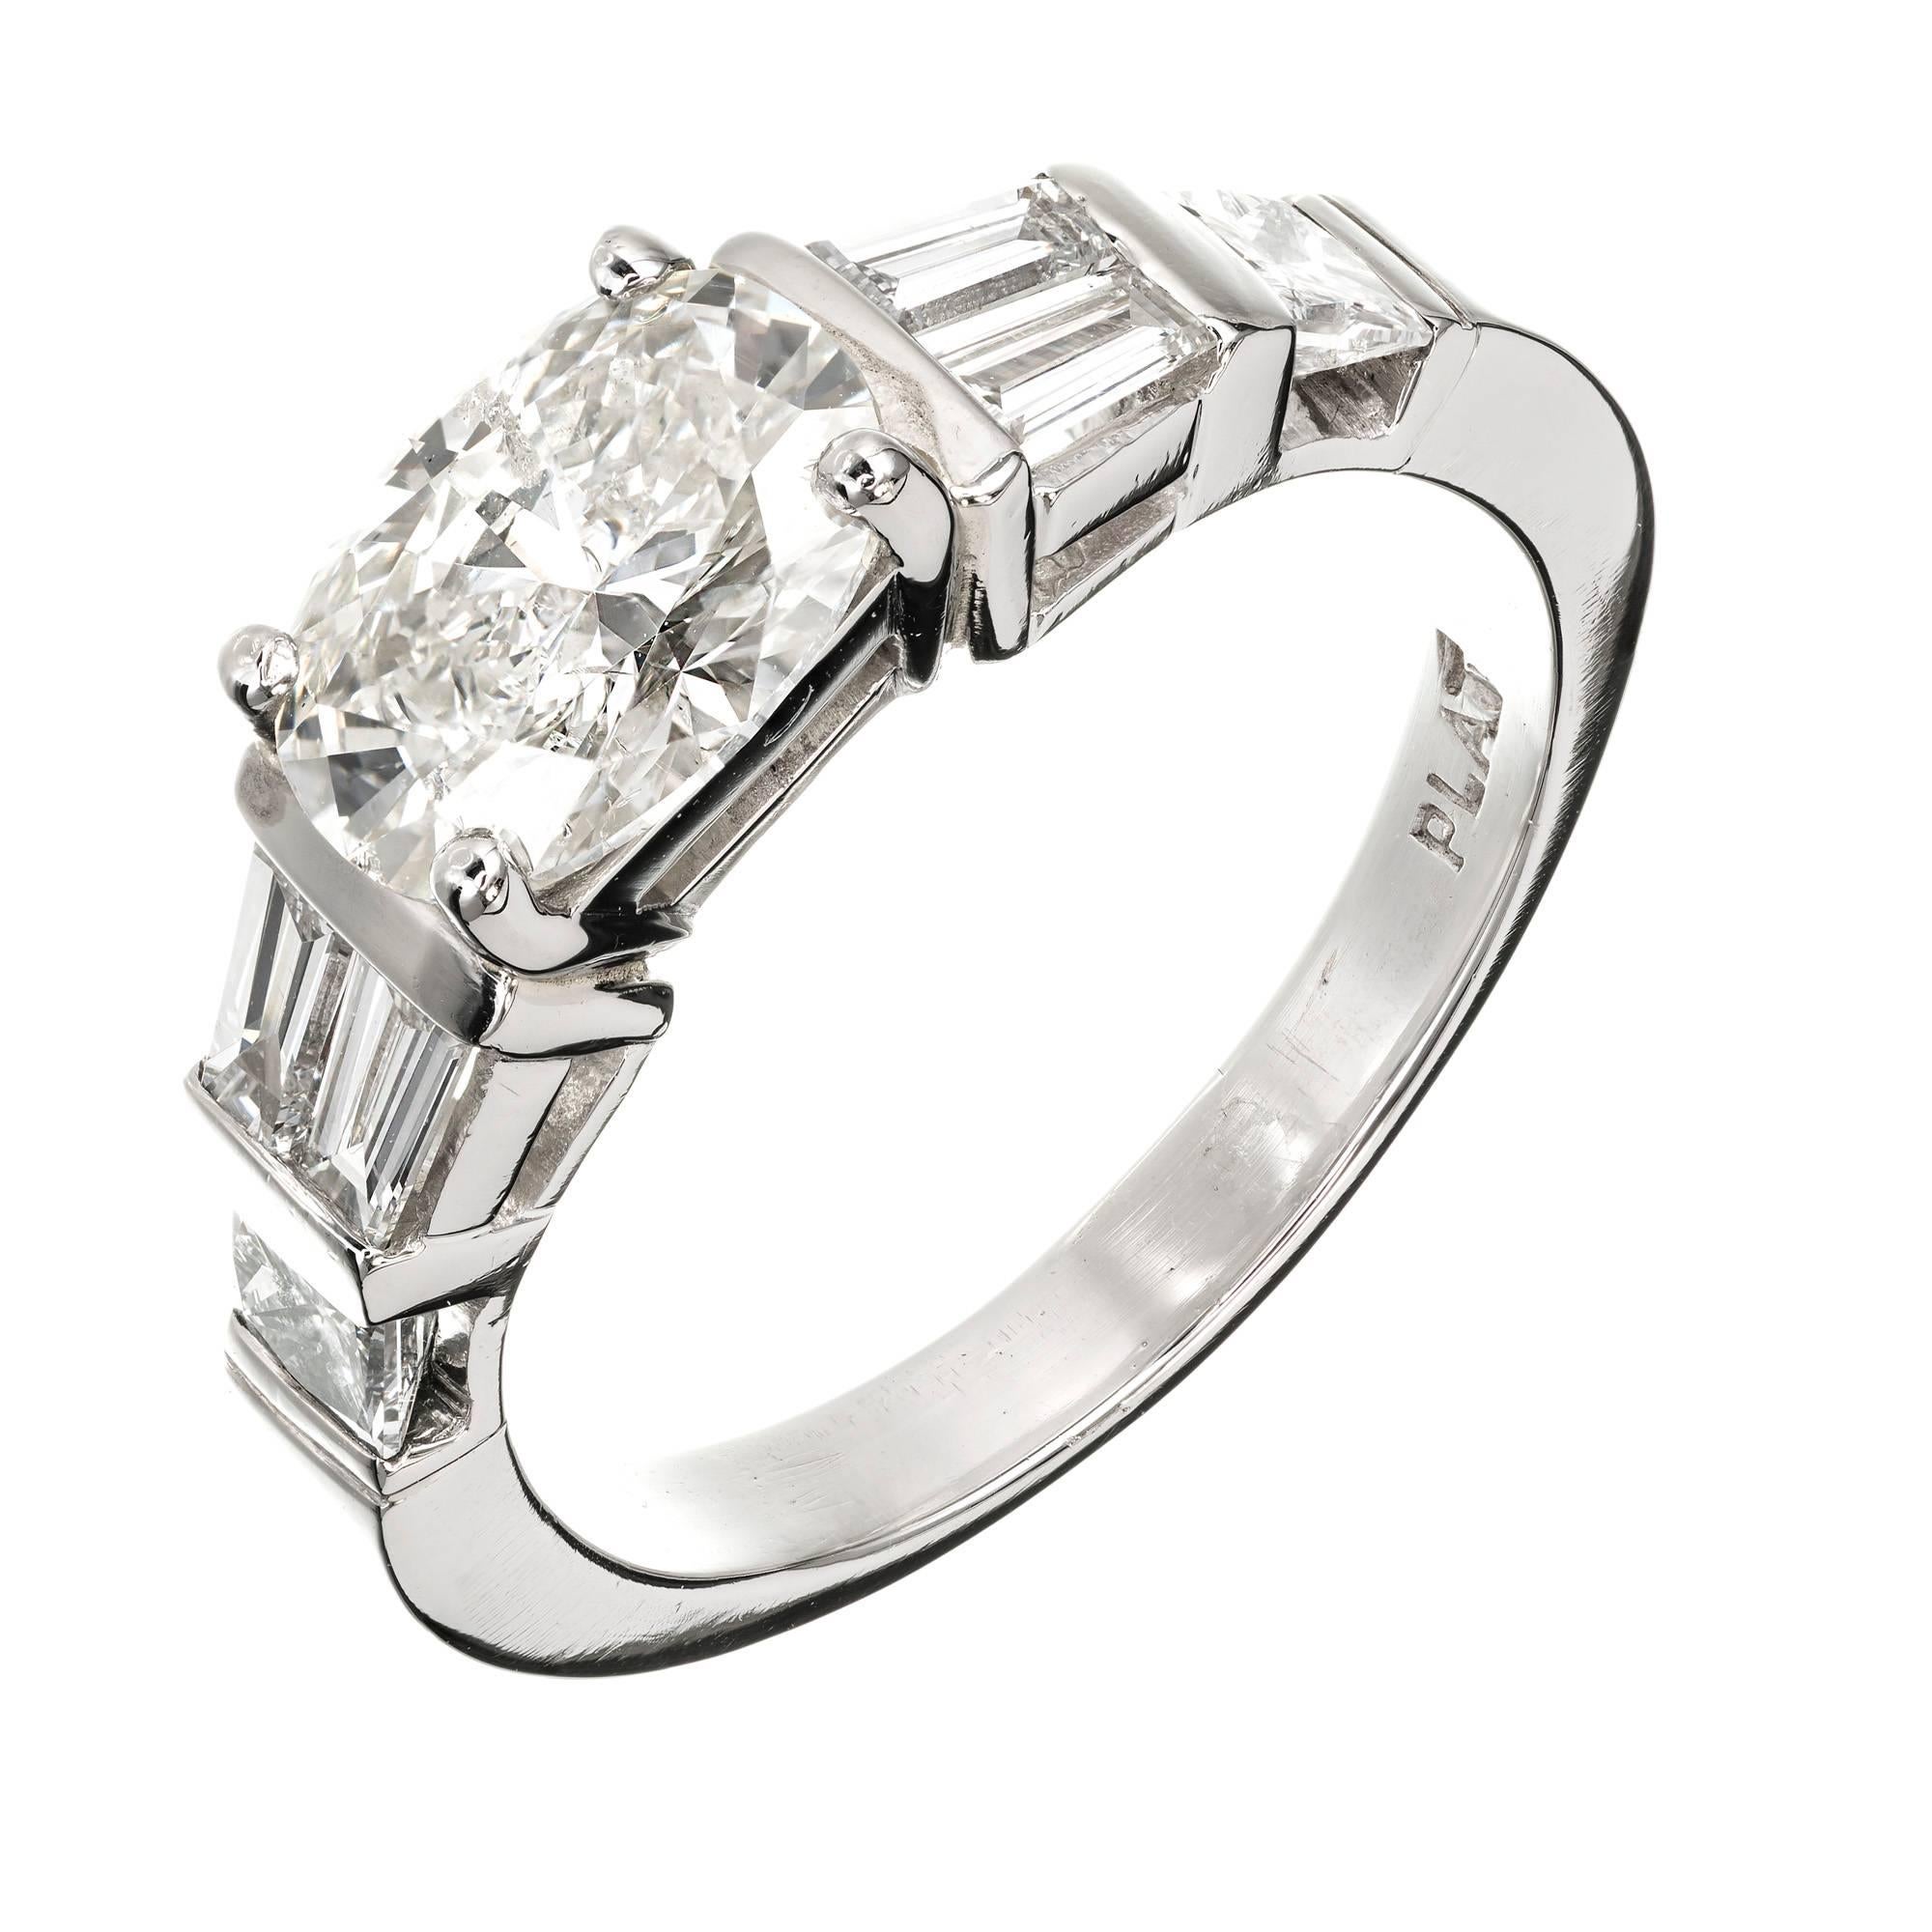 Peter Suchy oval Diamond engagement platinum ring. Solid Platinum with Princess cut and Baguette cut Diamond accents. Bar set side stones compliment the bright sparkly Ideal cut oval center Diamond set East to West to finish the one of a kind look.